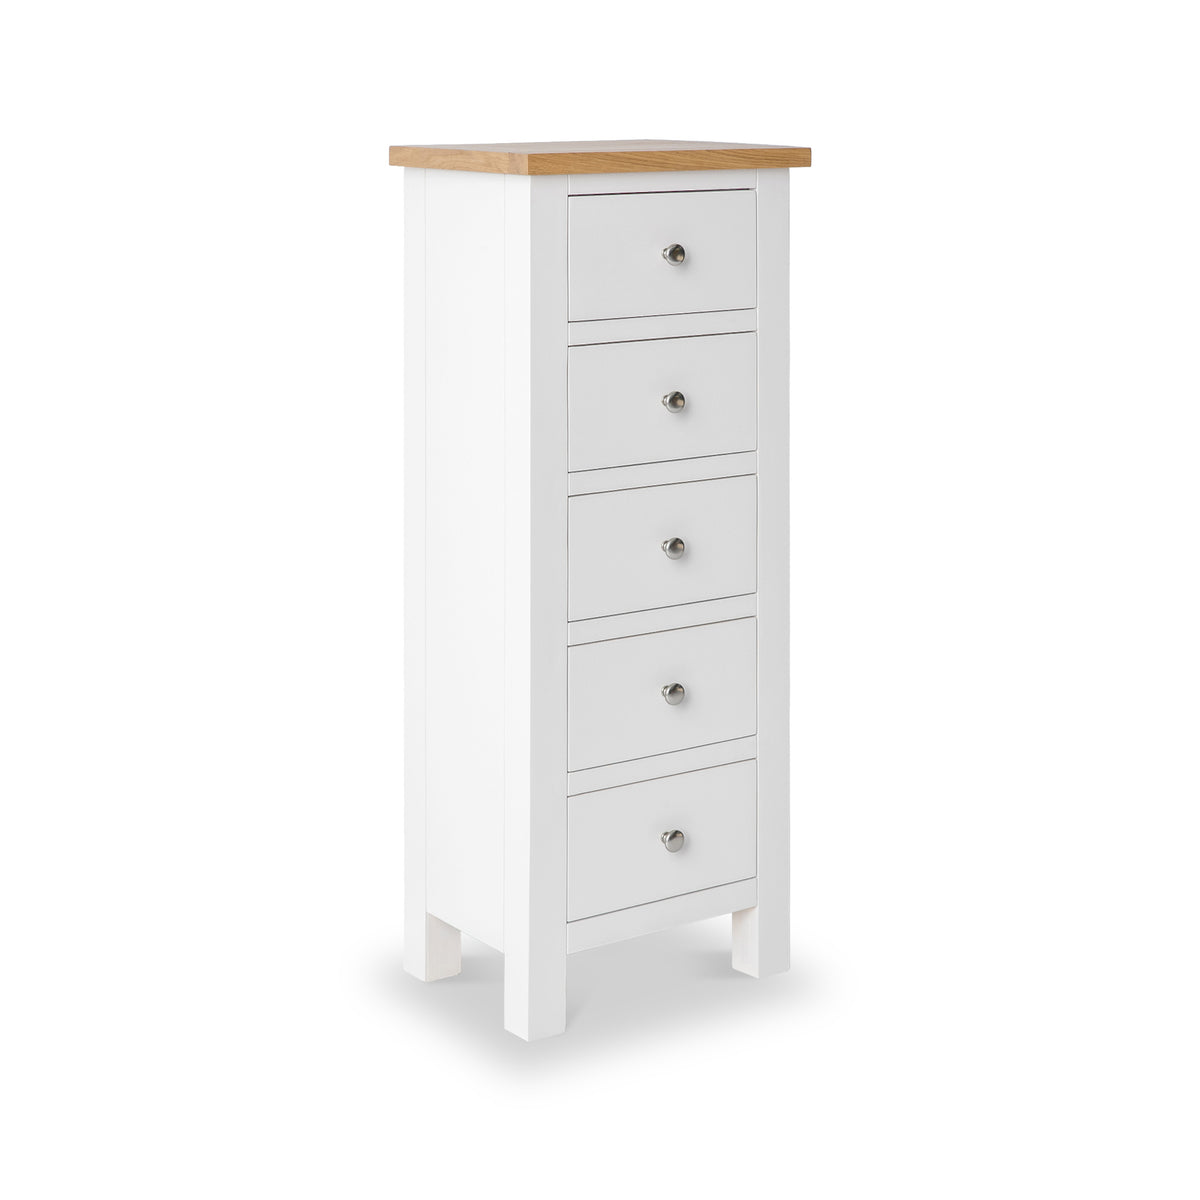 Farrow White 5 Drawer Tallboy Chest from Roseland Furniture